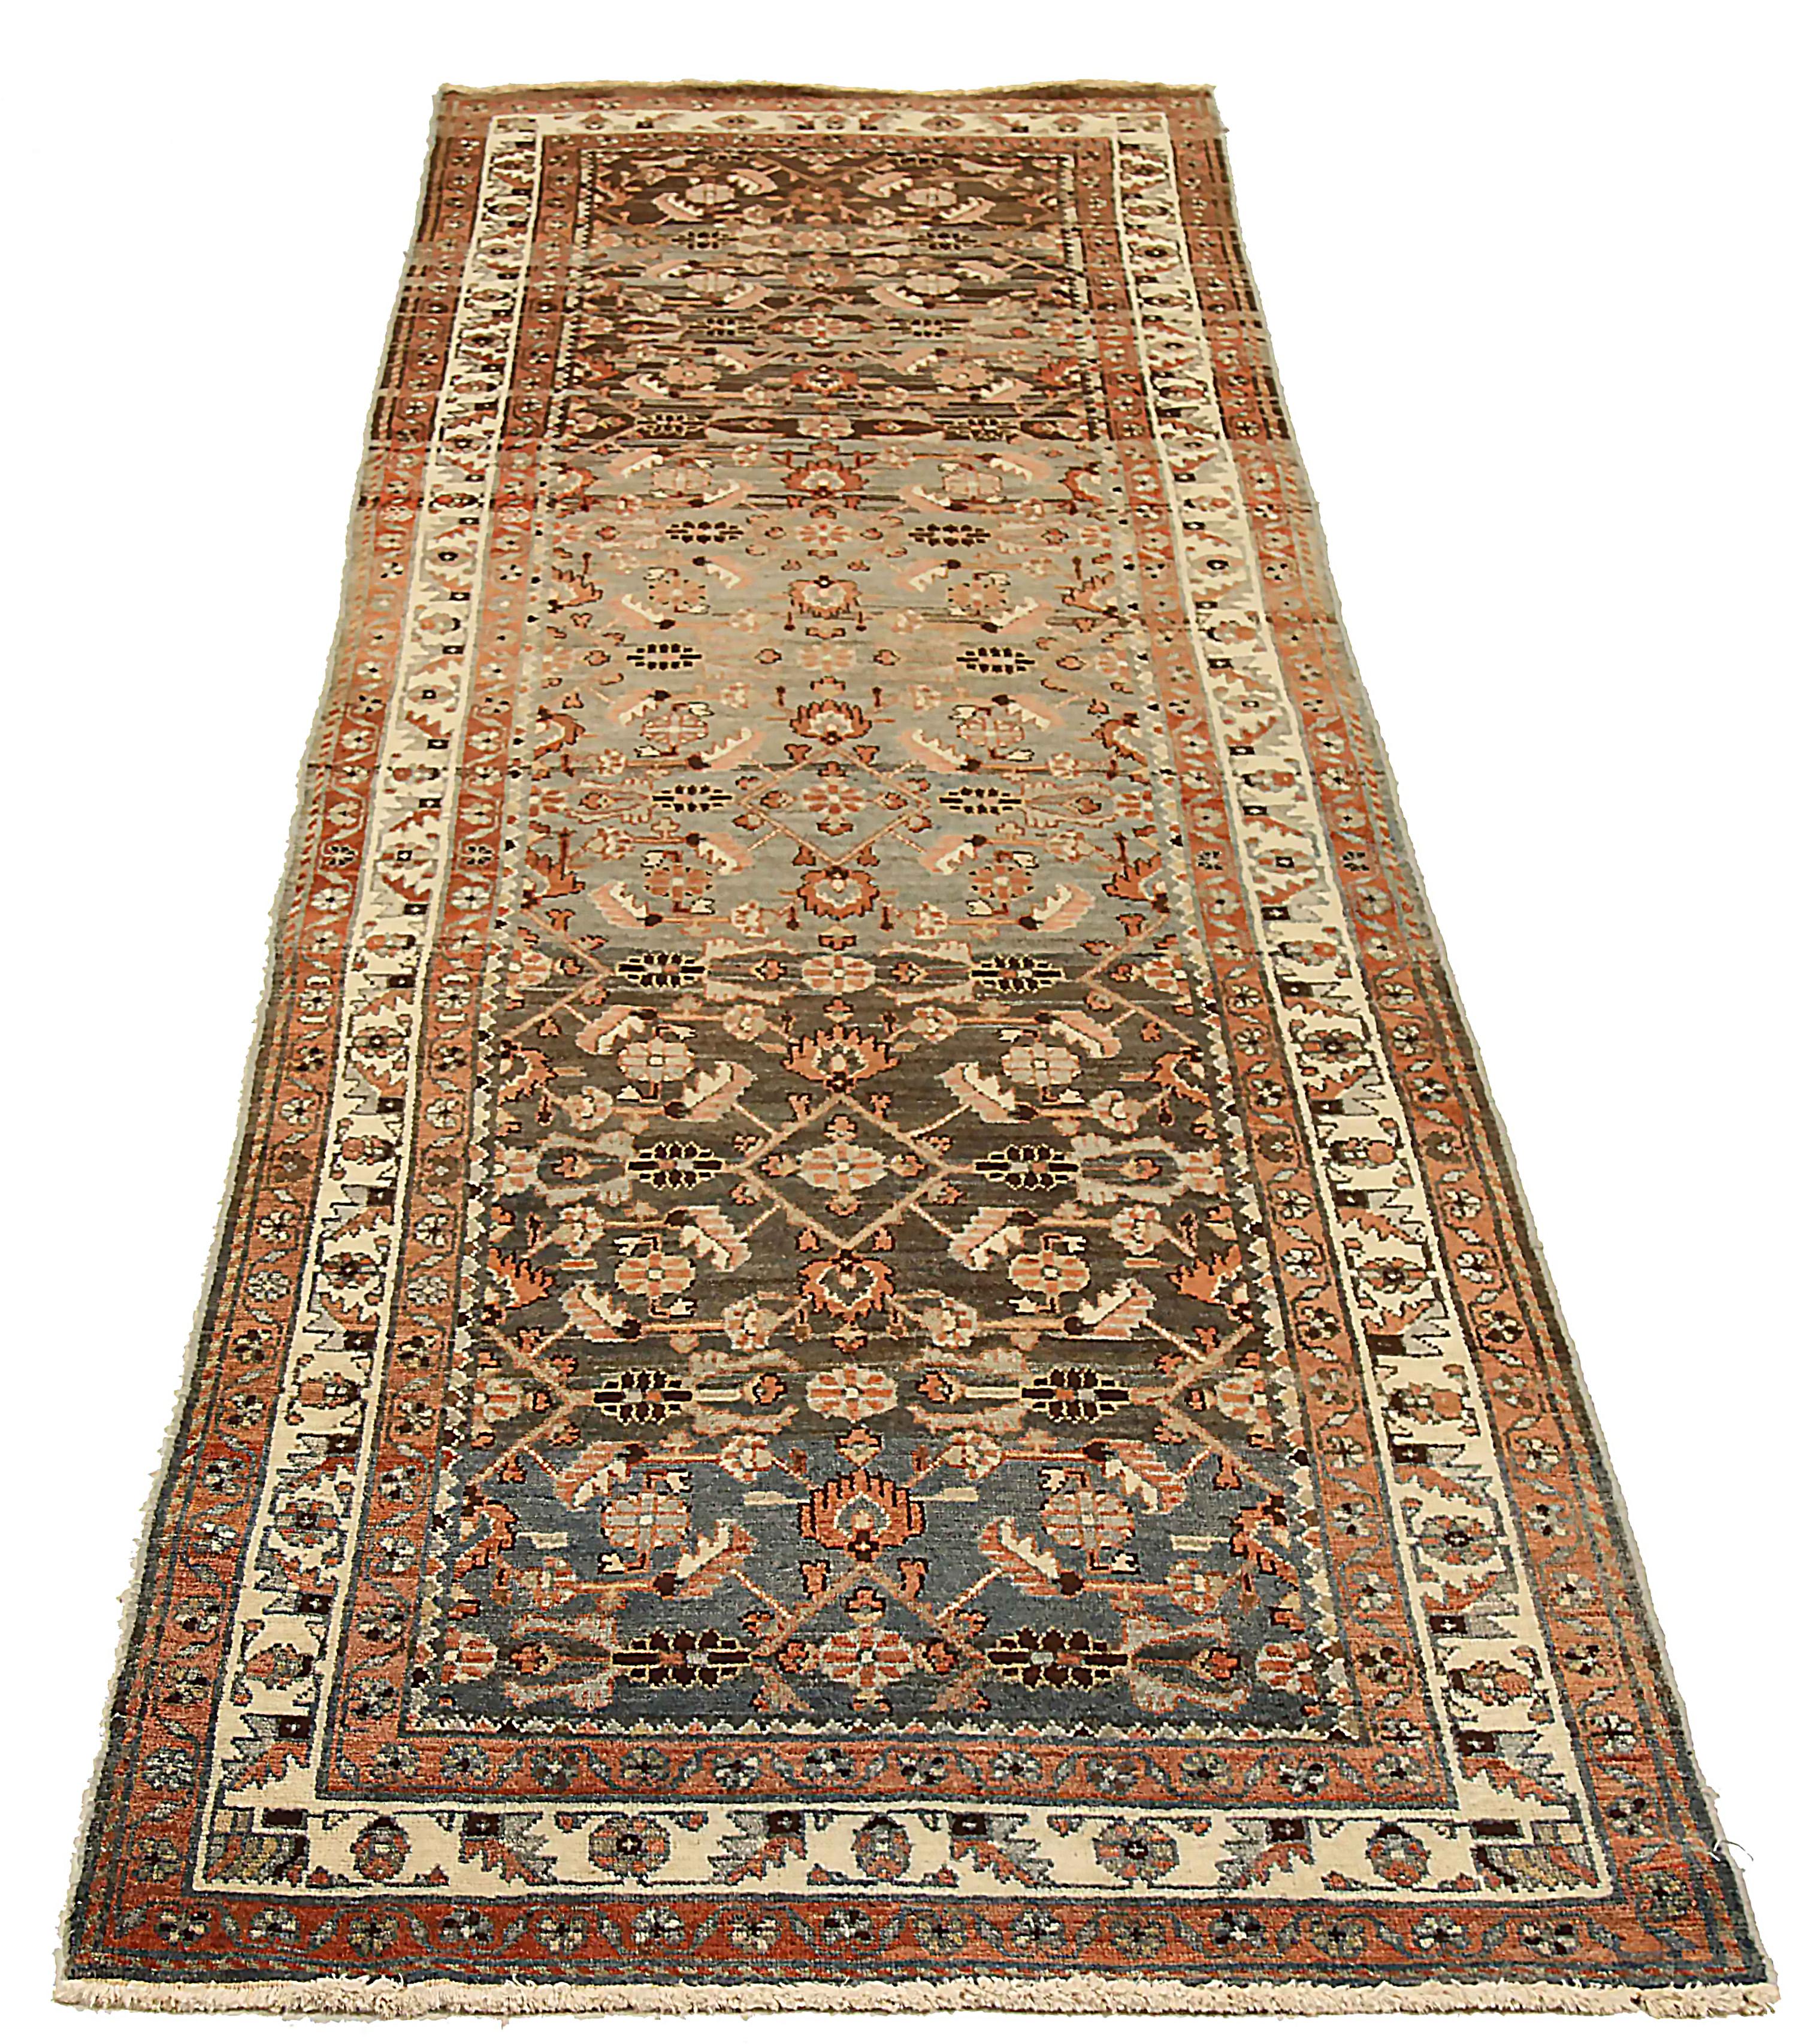 Antique Persian runner rug handwoven from the finest sheep’s wool. It’s colored with all-natural vegetable dyes that are safe for humans and pets. It’s a traditional Malayer design featuring a mix of botanical and tribal patterns. It’s a lovely